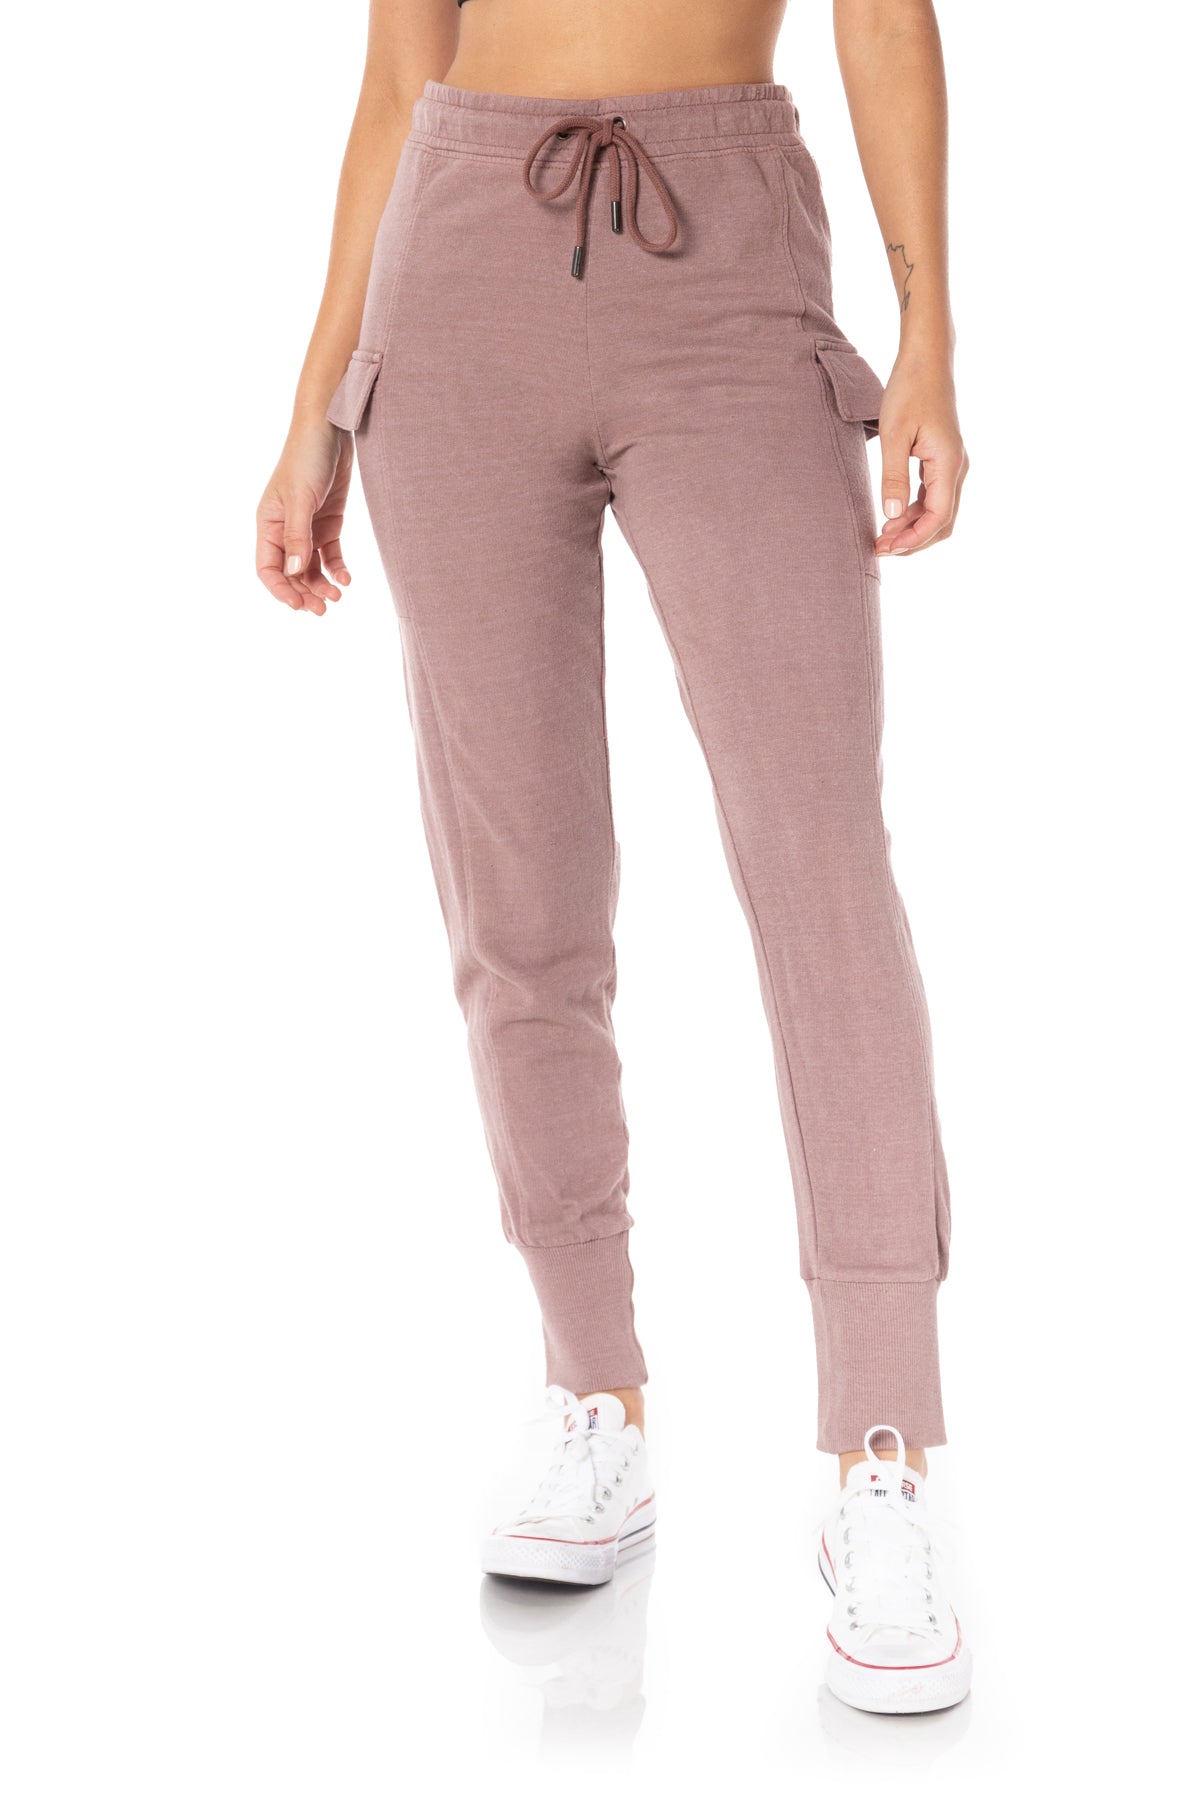 Kyodan Womens Recycled French Terry Cargo Sweatpant Jogger